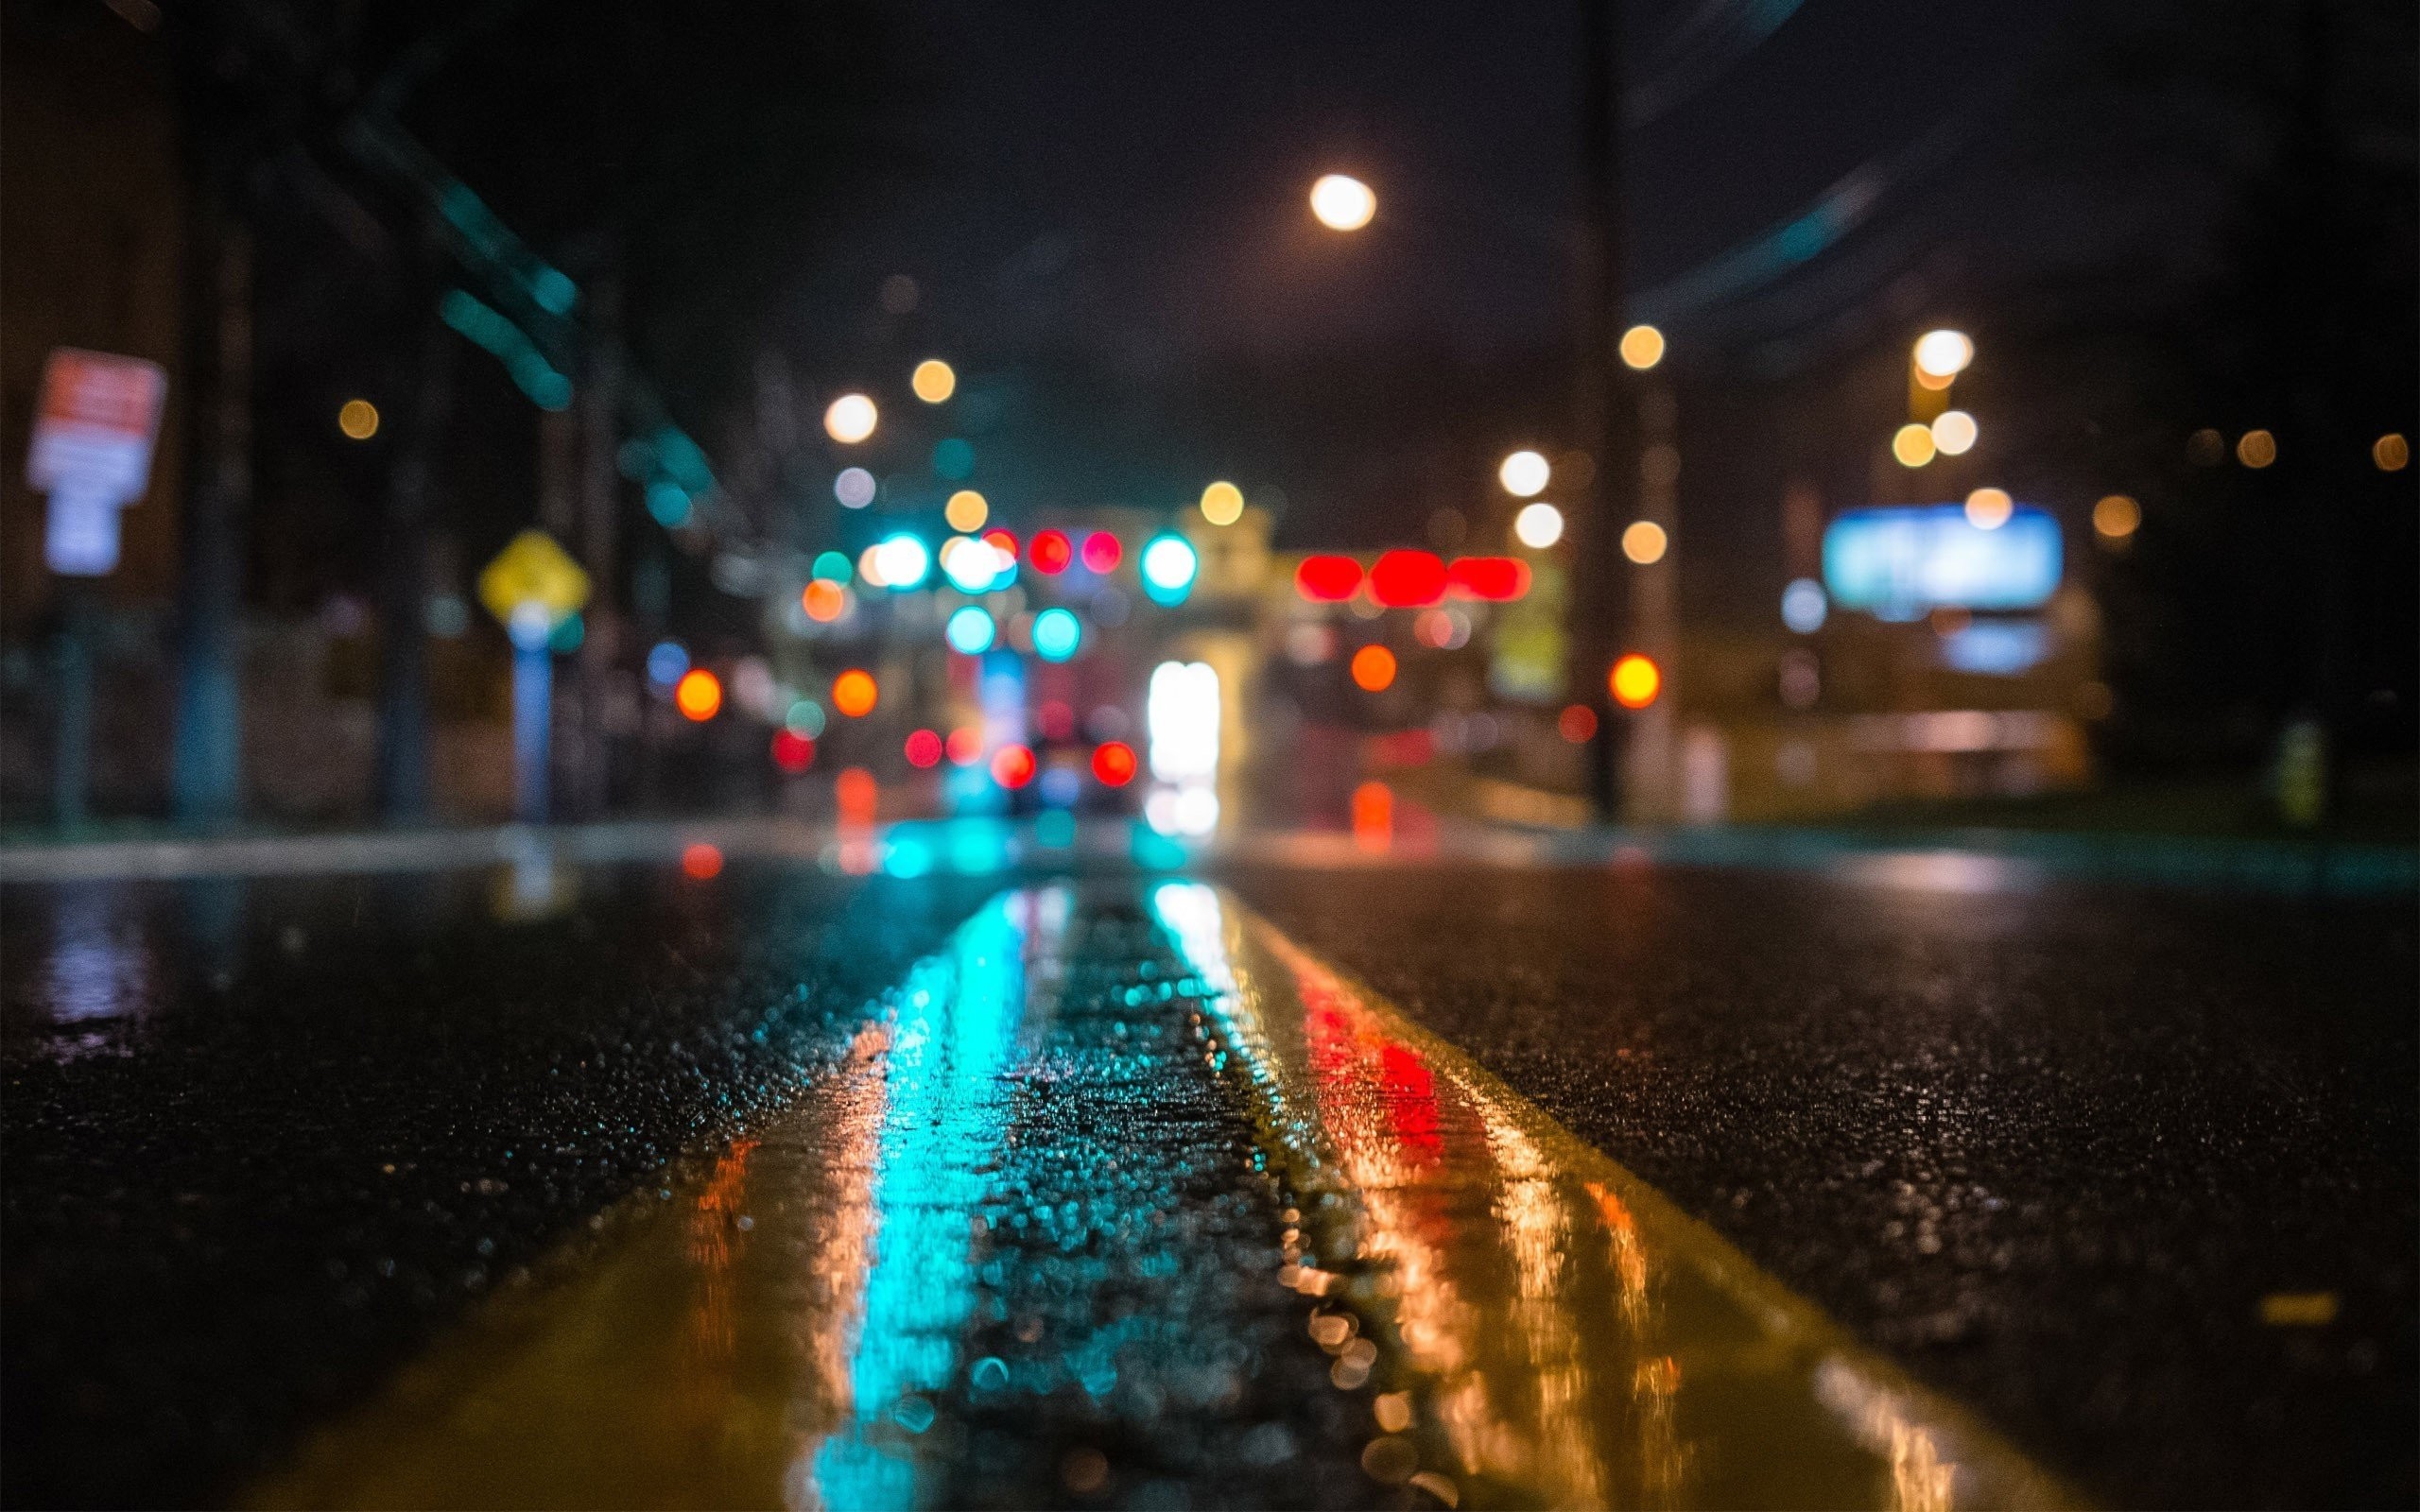 2560x1600 City lights, wet street inspiration with color #LGLimitlessDesign #Contest